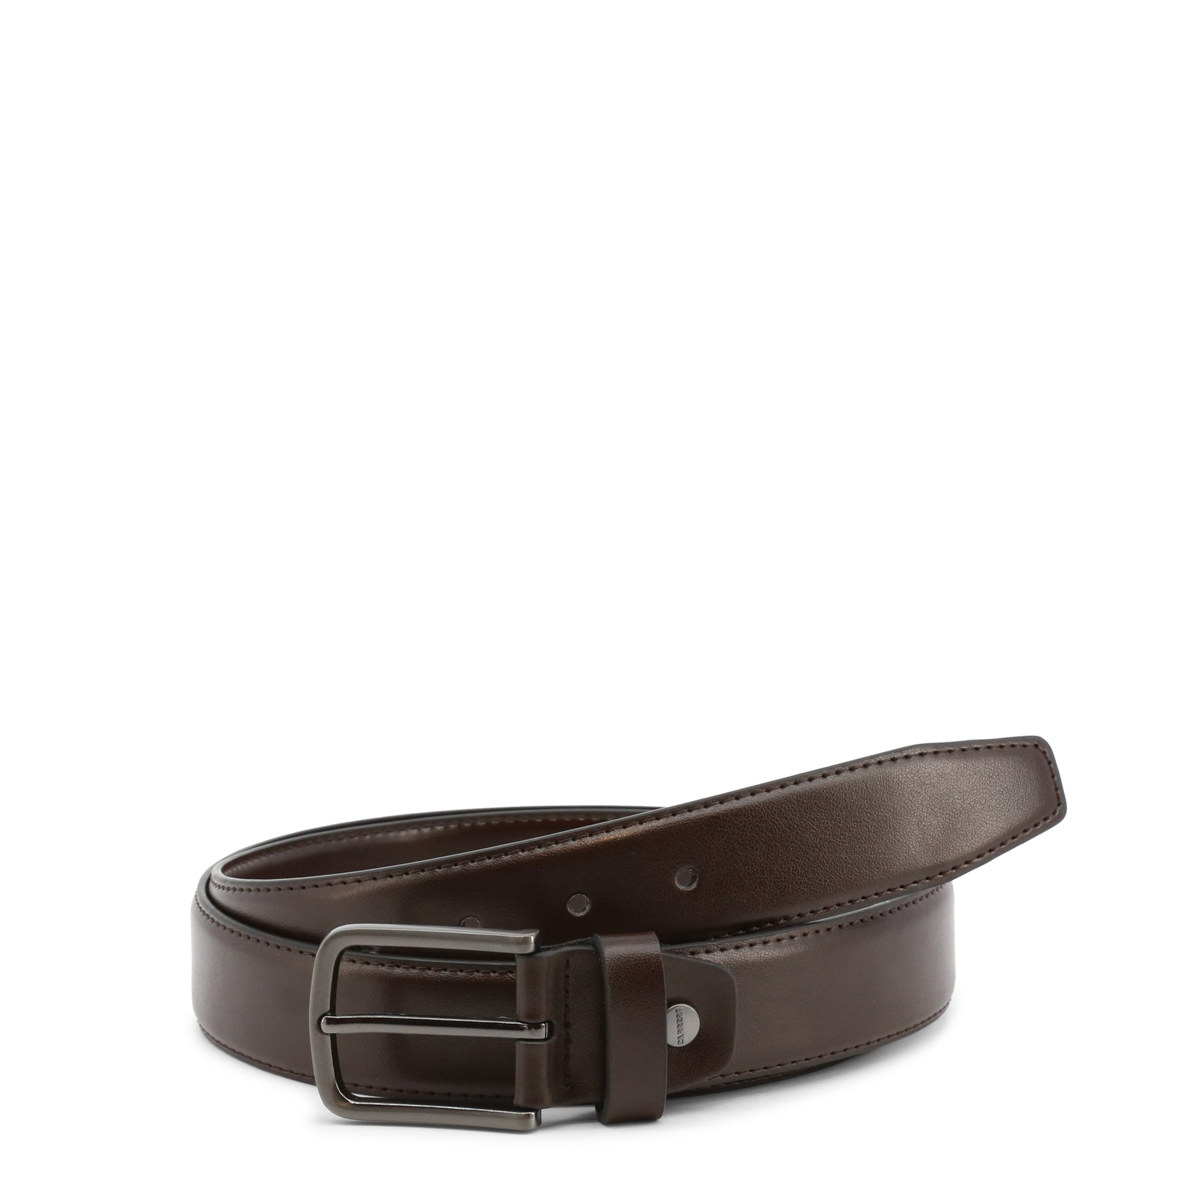 Carrera Jeans Brown Belts for Men - GROUND-CB7722